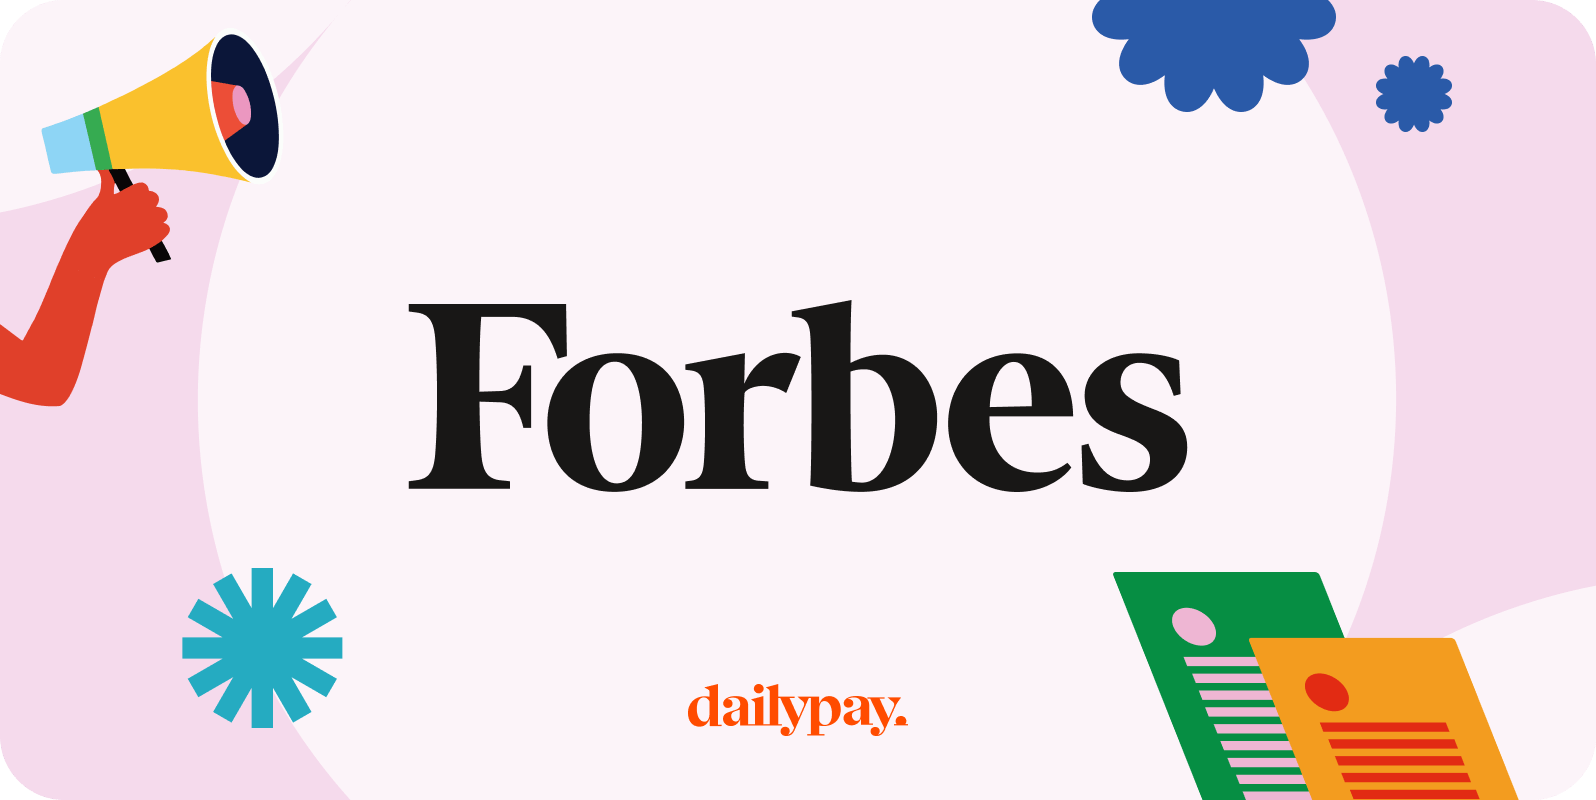 Forbes text with a background featuring stylized illustrations of a megaphone, papers, and shapes alongside the dailypay logo at the bottom.